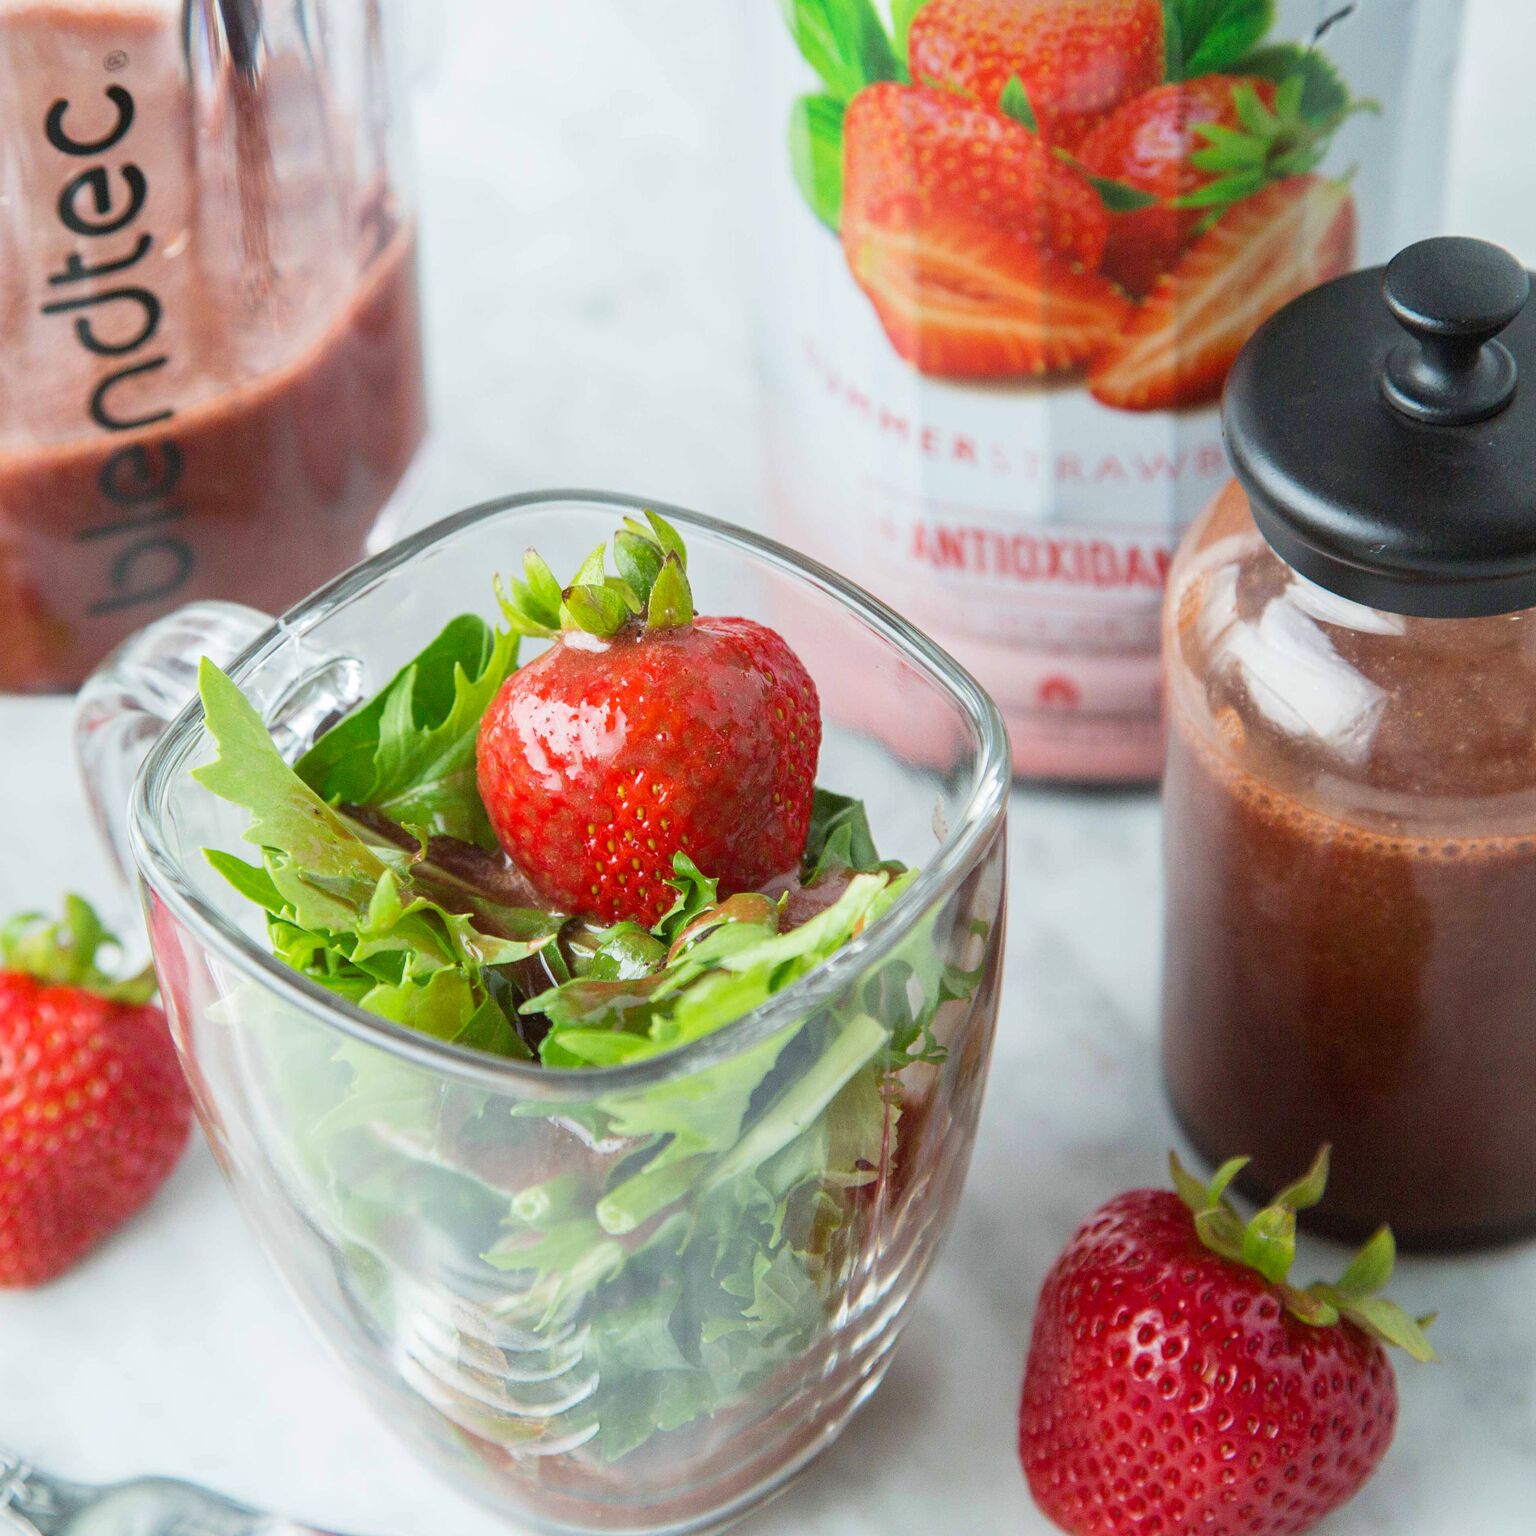 Summer Strawberry Balsamic Dressing Made with Smartfruit